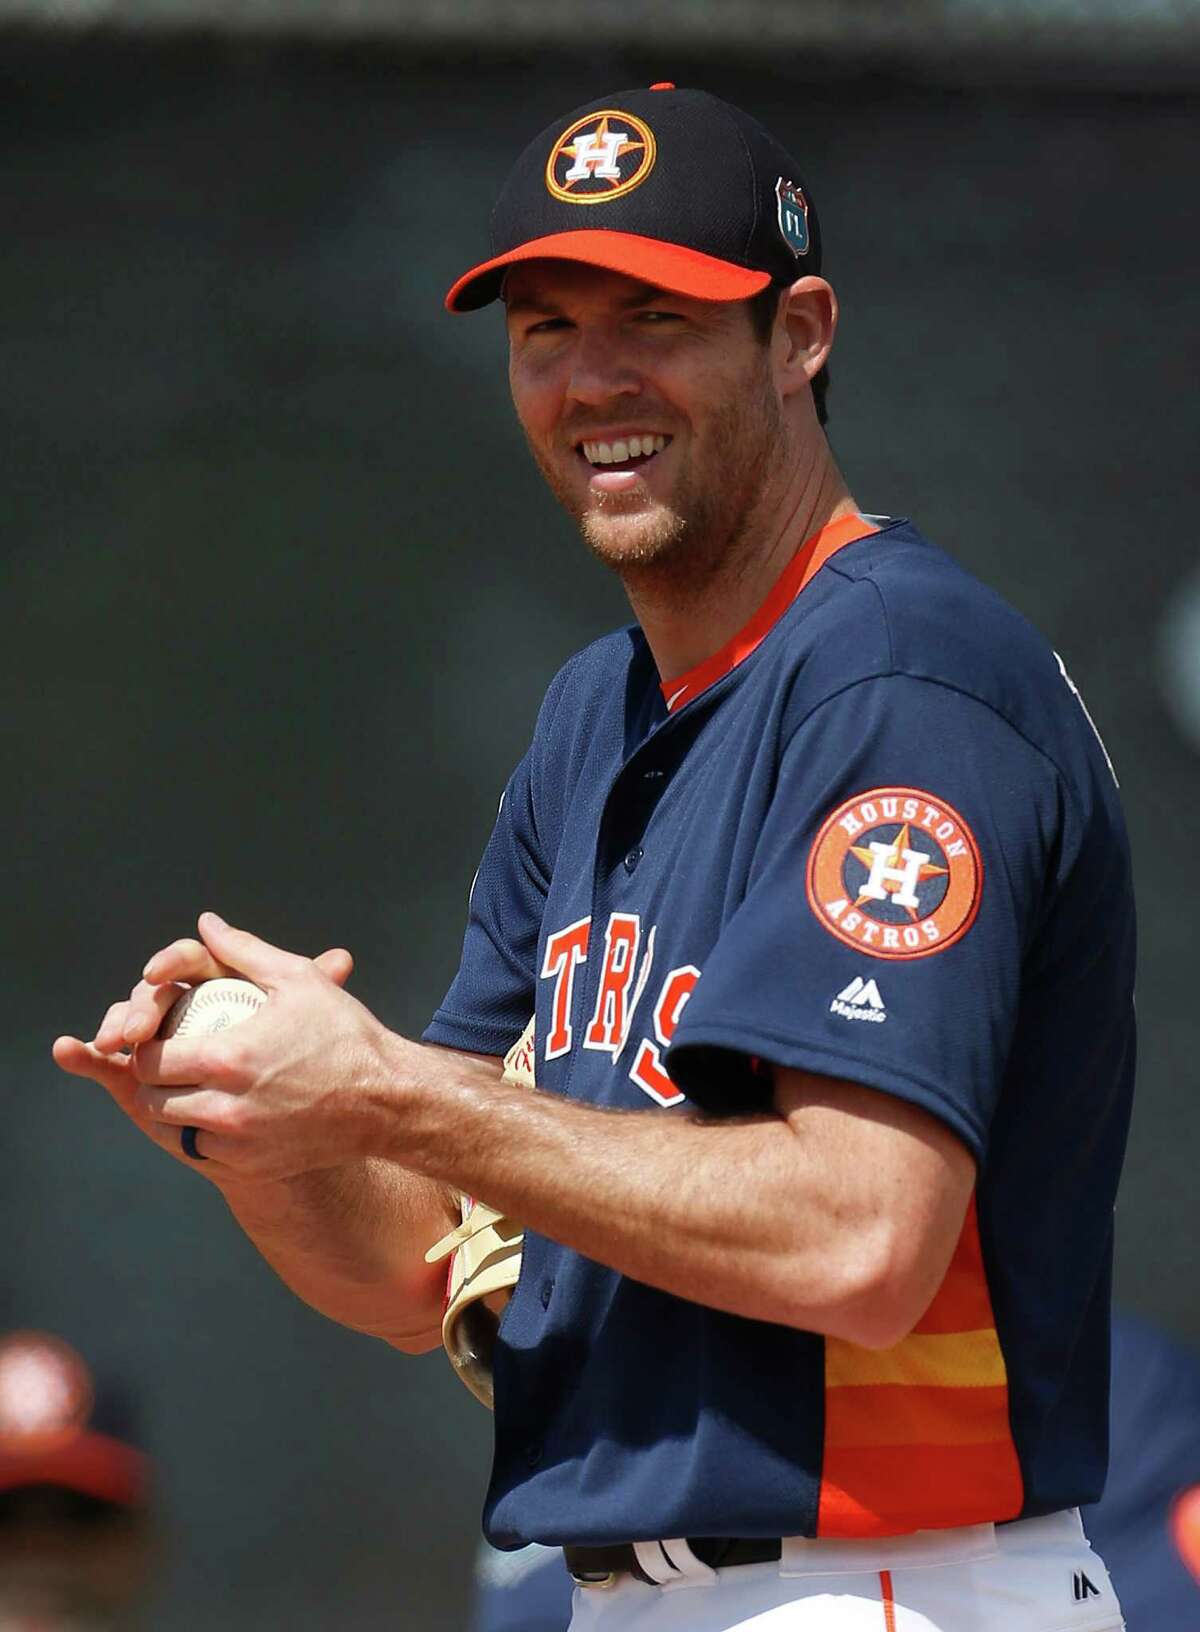 ﻿A year after struggles relegated him to the Nationals' bullpen, Doug Fister leads the Astros in wins (eight), quality starts (11) and starter's ERA (3.21).